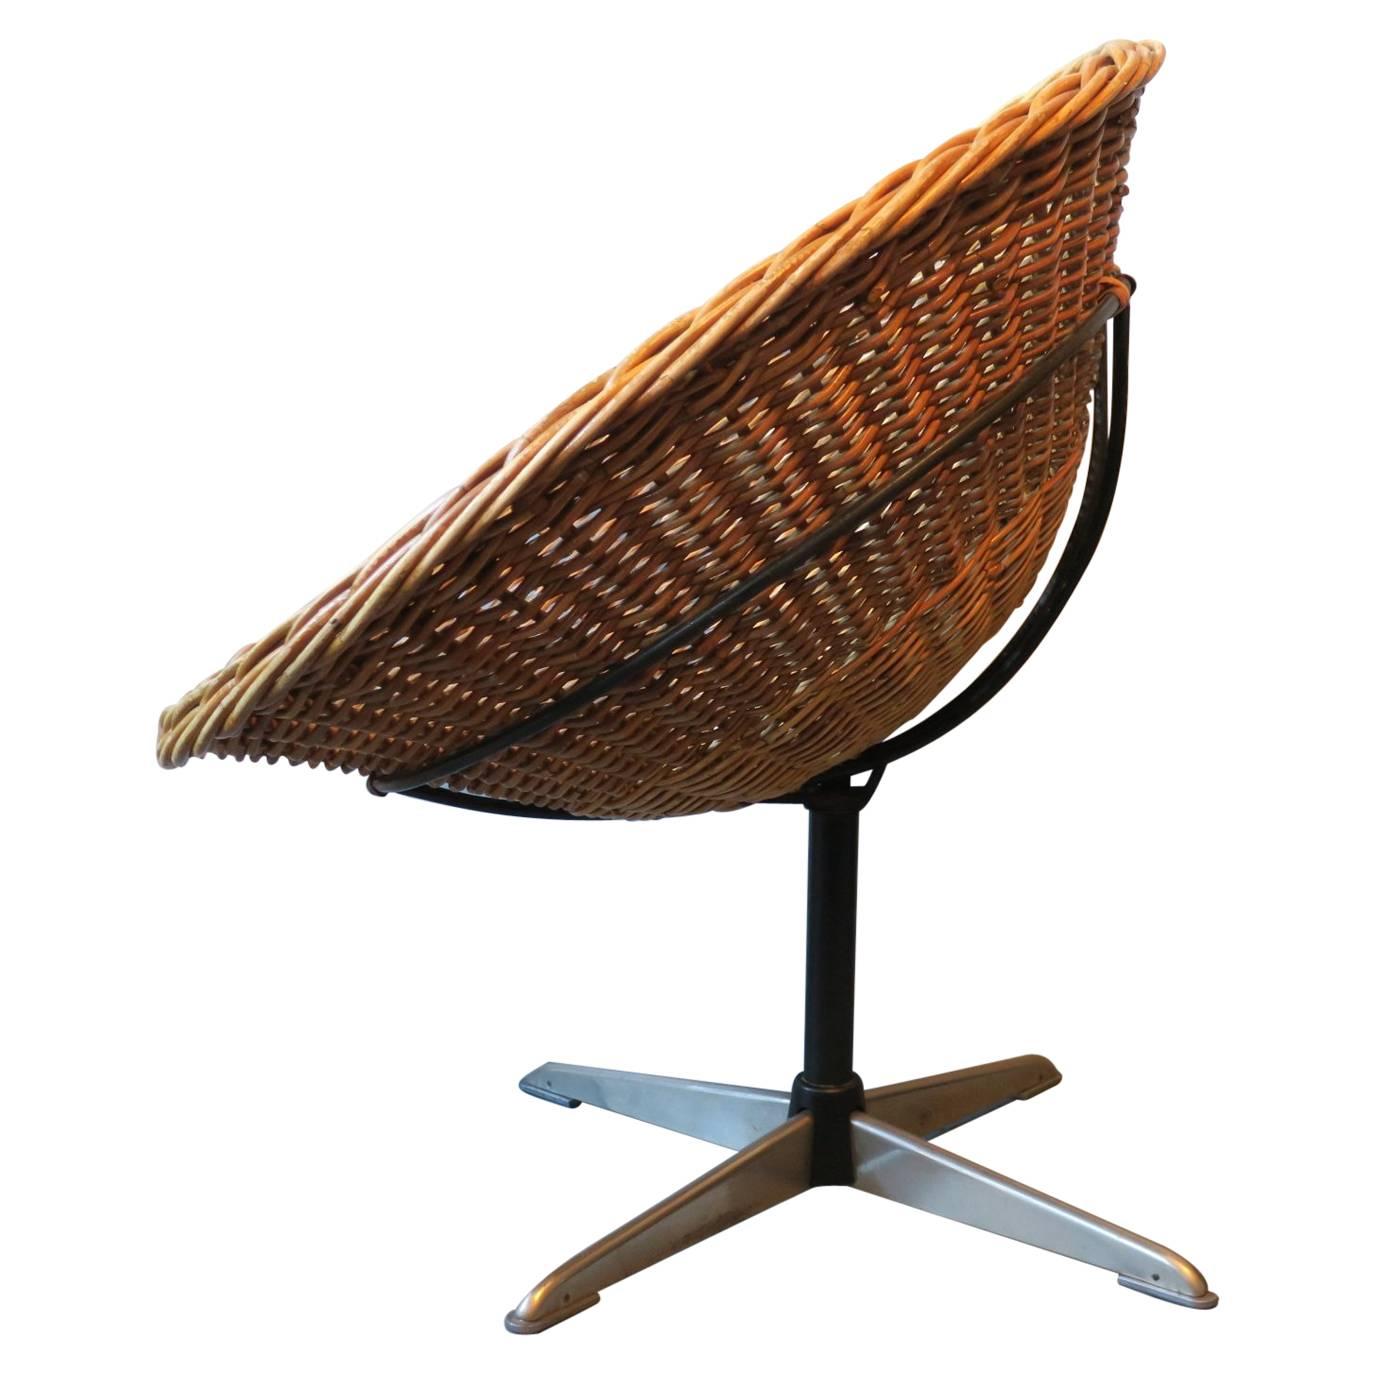 Rattan 1960s pod lounge chair on an iron base with steel feet. Unusually the chair has a swivel function through 360 degrees. Probably French.
Very good vintage condition with minimal signs of age and use.